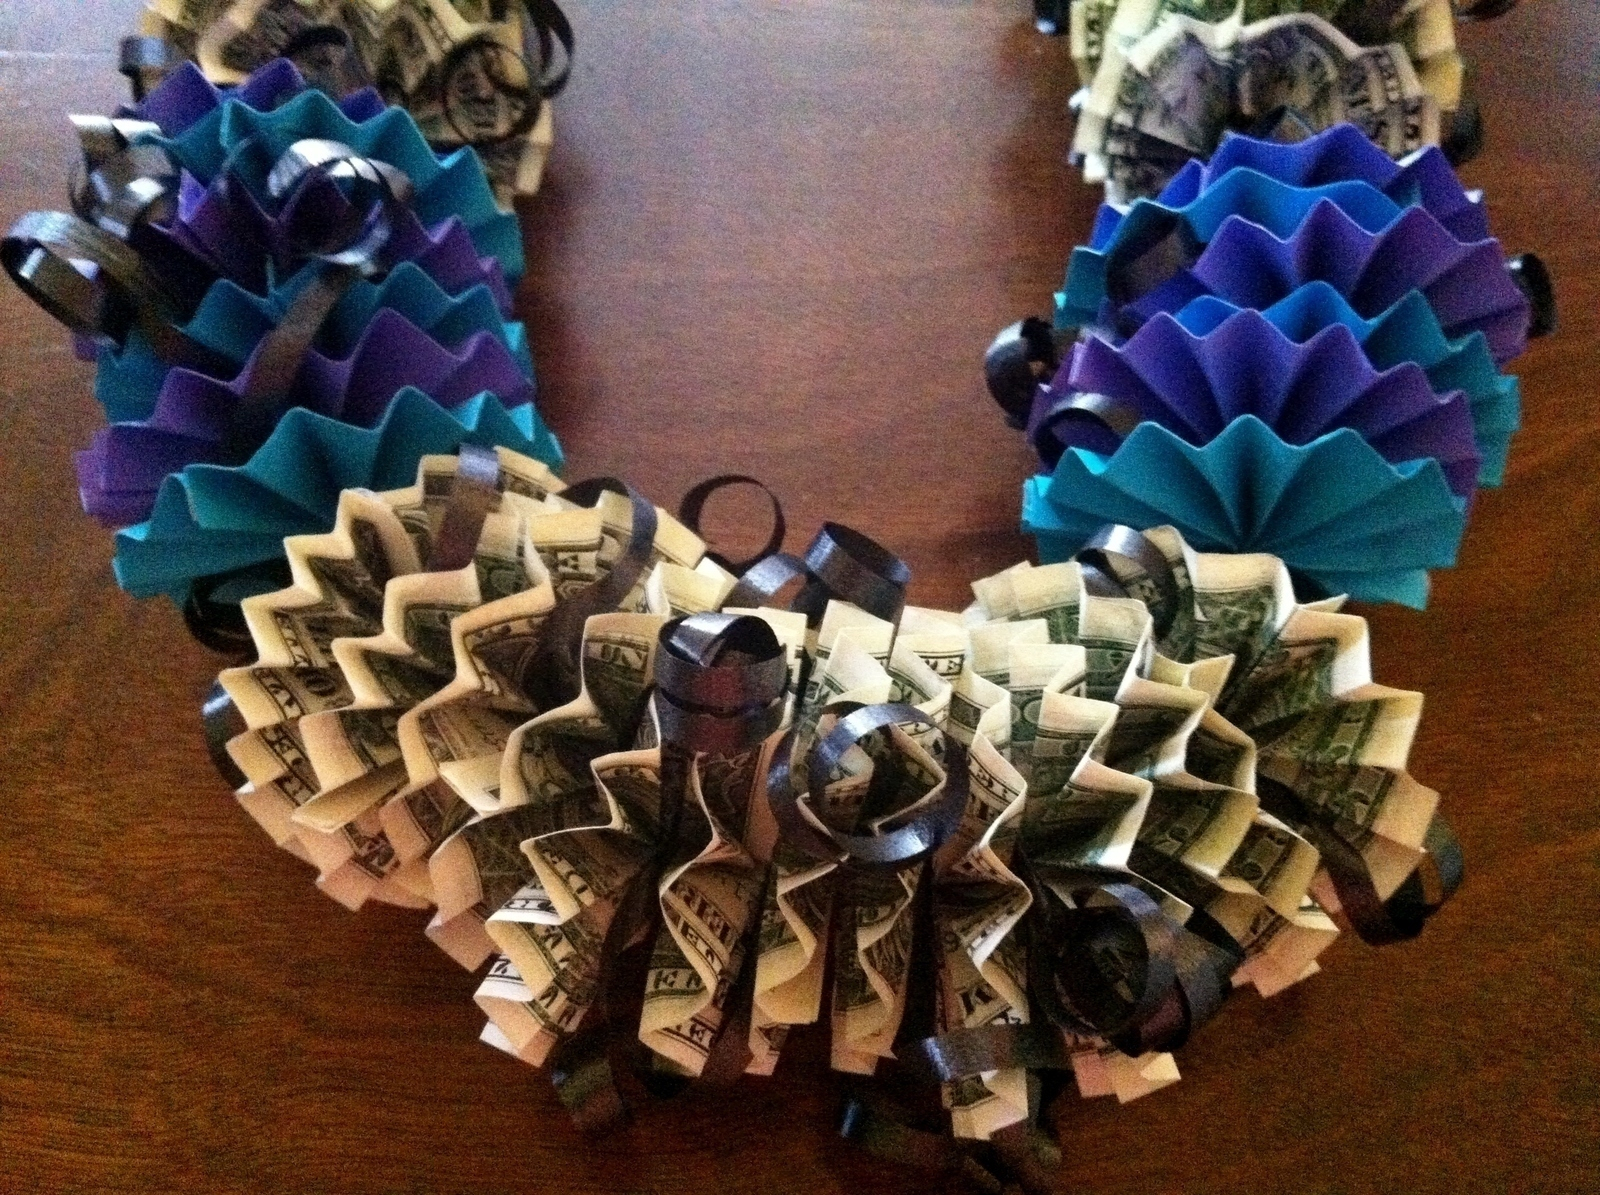 How To Make Origami Money Lei Money Lei How To Make A Recycled Necklace Papercraft On Cut Out